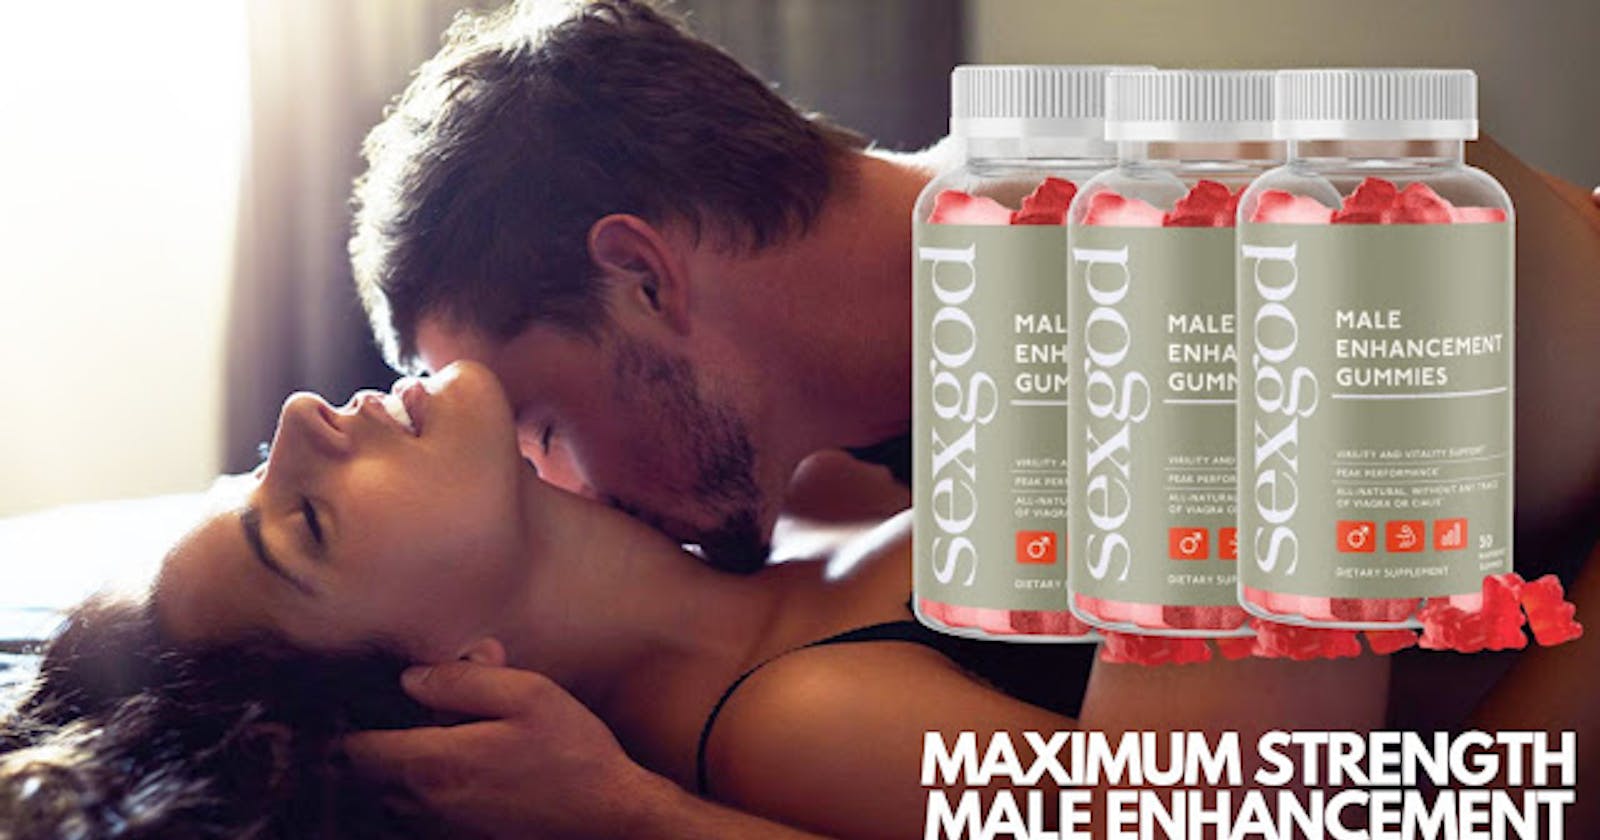 Sexgod Male Enhancement Gummies [Top Reviews] Shocking Results Real Or Fake!!